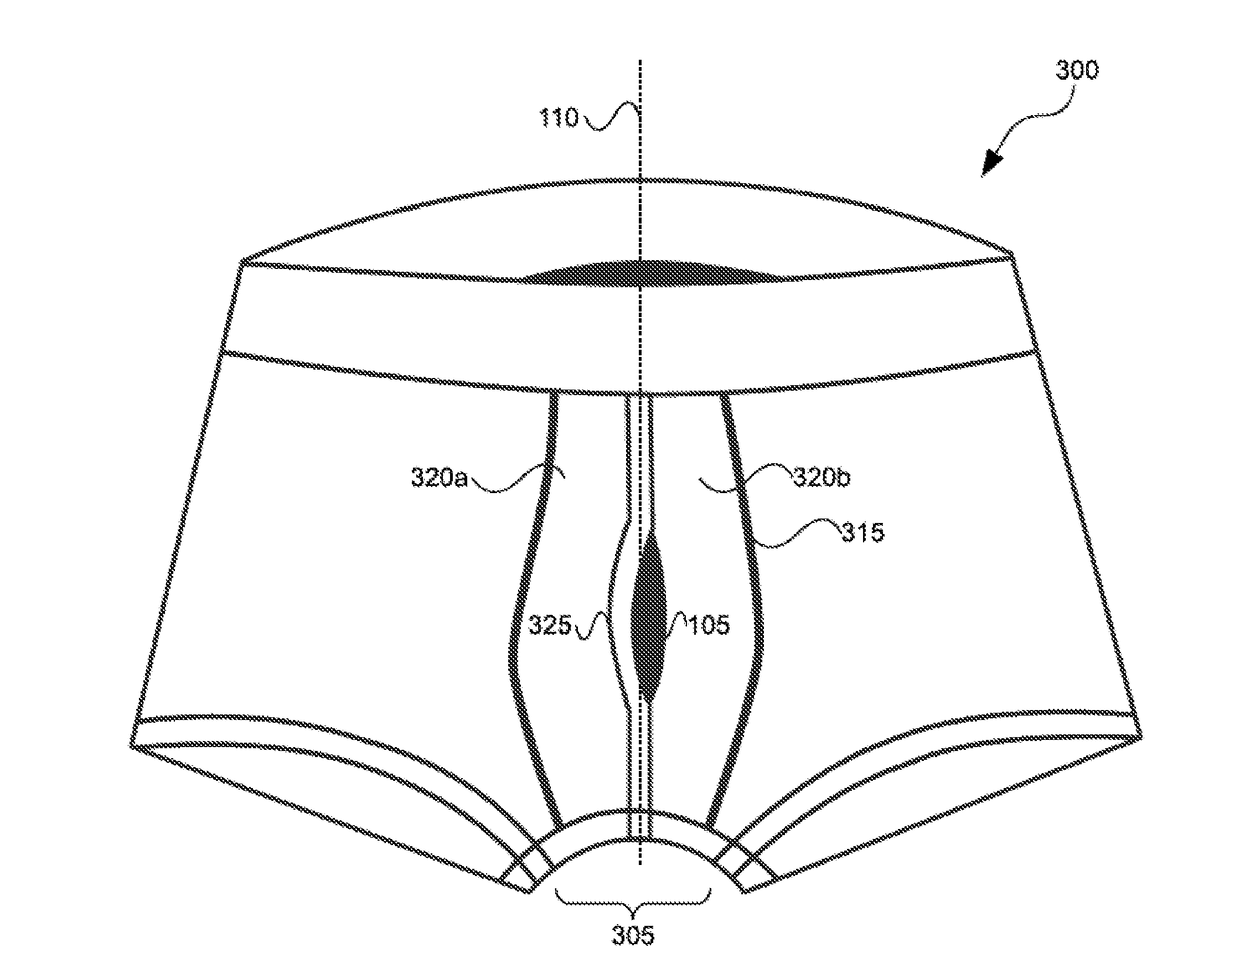 A garment having a substantially centrally located access aperture